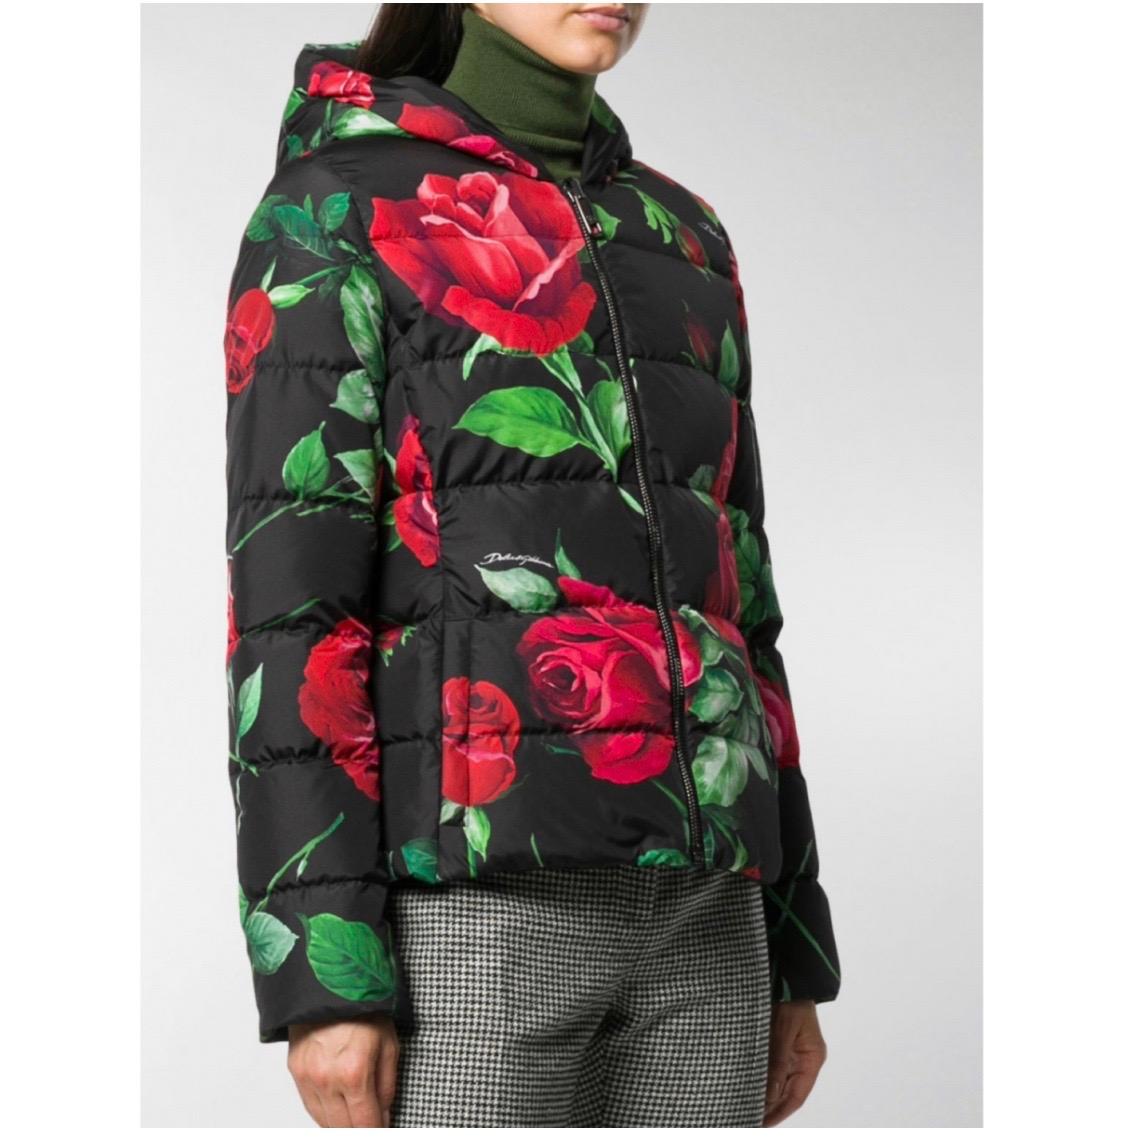 Black, red and green feather down
rose print puffer jacket from Dolce &
Gabbana featuring classic hood, front

zip fastening and long sleeves.

DETAILS

- Dry clean only

- Main: 100% polyester, Lining: 100%
feather down, Lining: 100% polyester
-